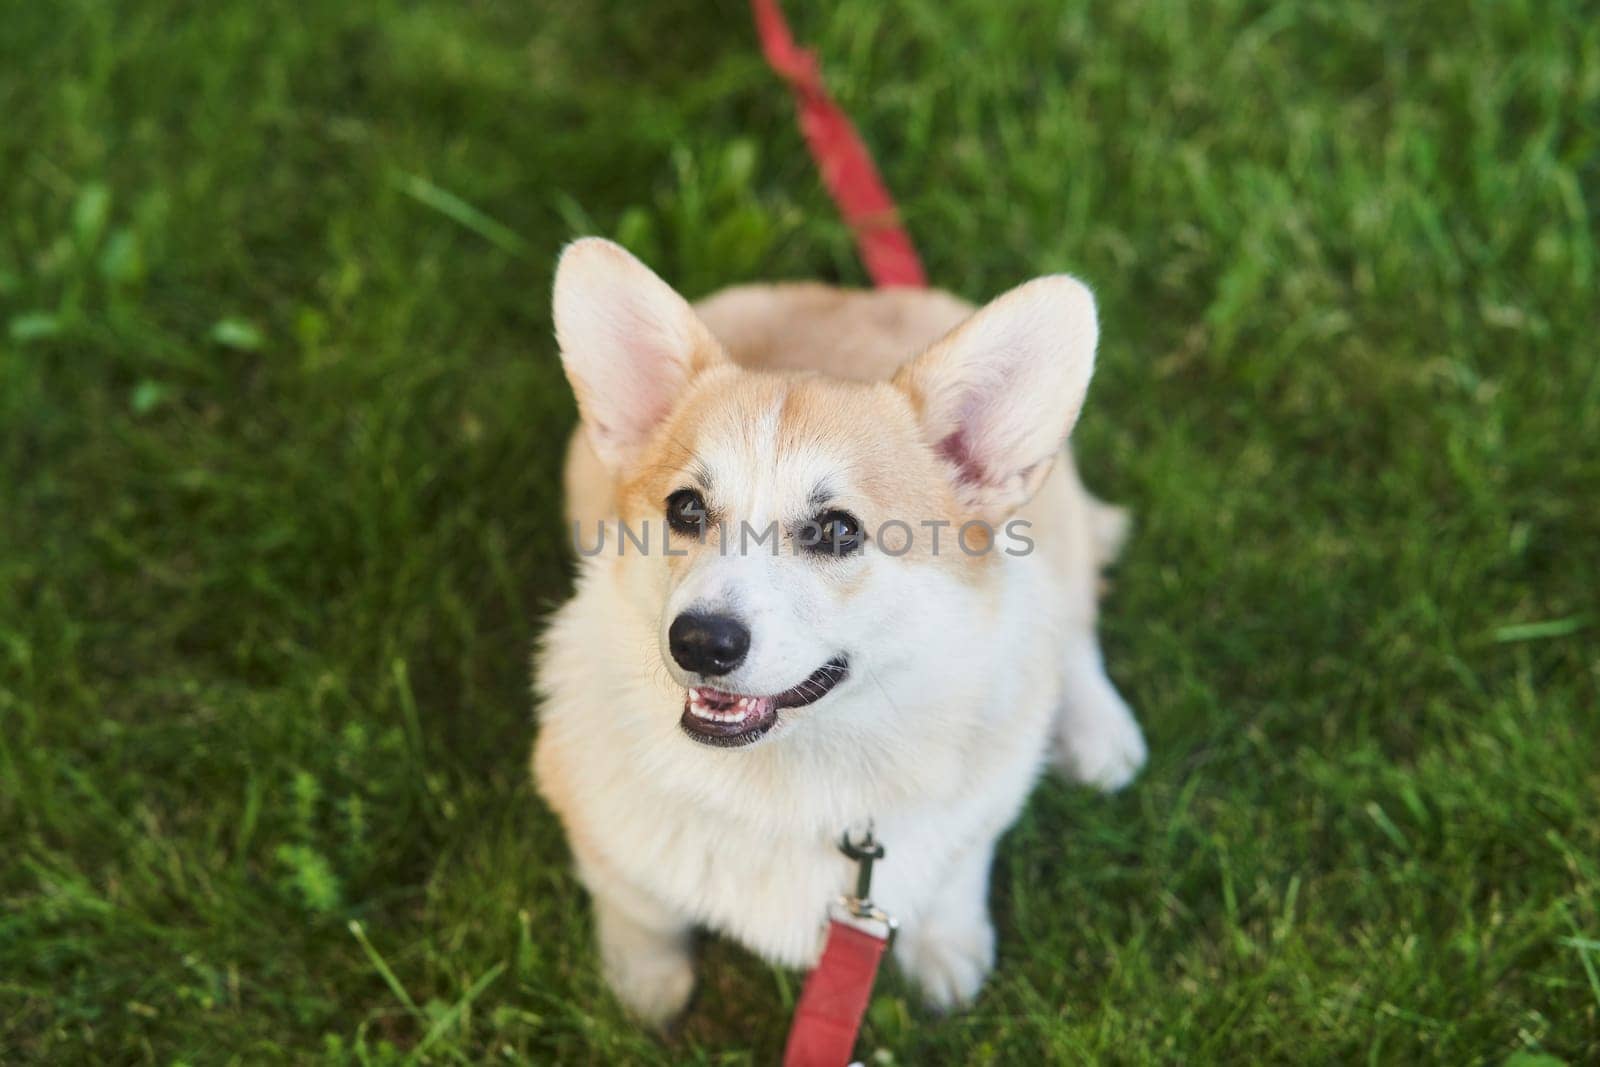 Welsh Corgi Pembroke dog sits on a manicured green lawn in a park in summer by driver-s